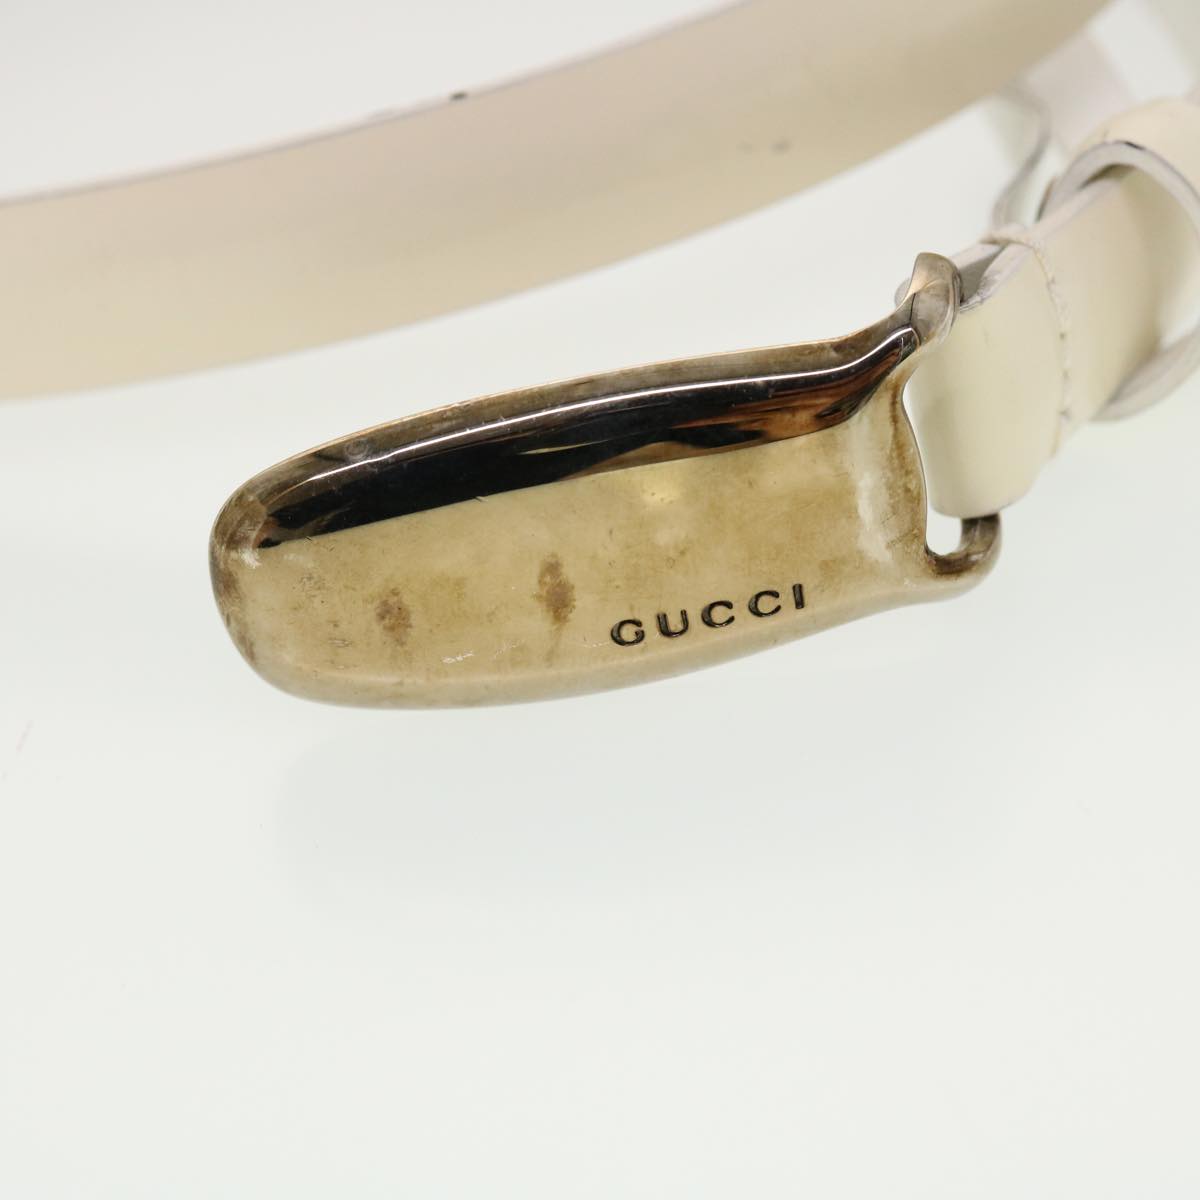 GUCCI GG Canvas Belt Leather 4Set Black Red white Auth ti1159